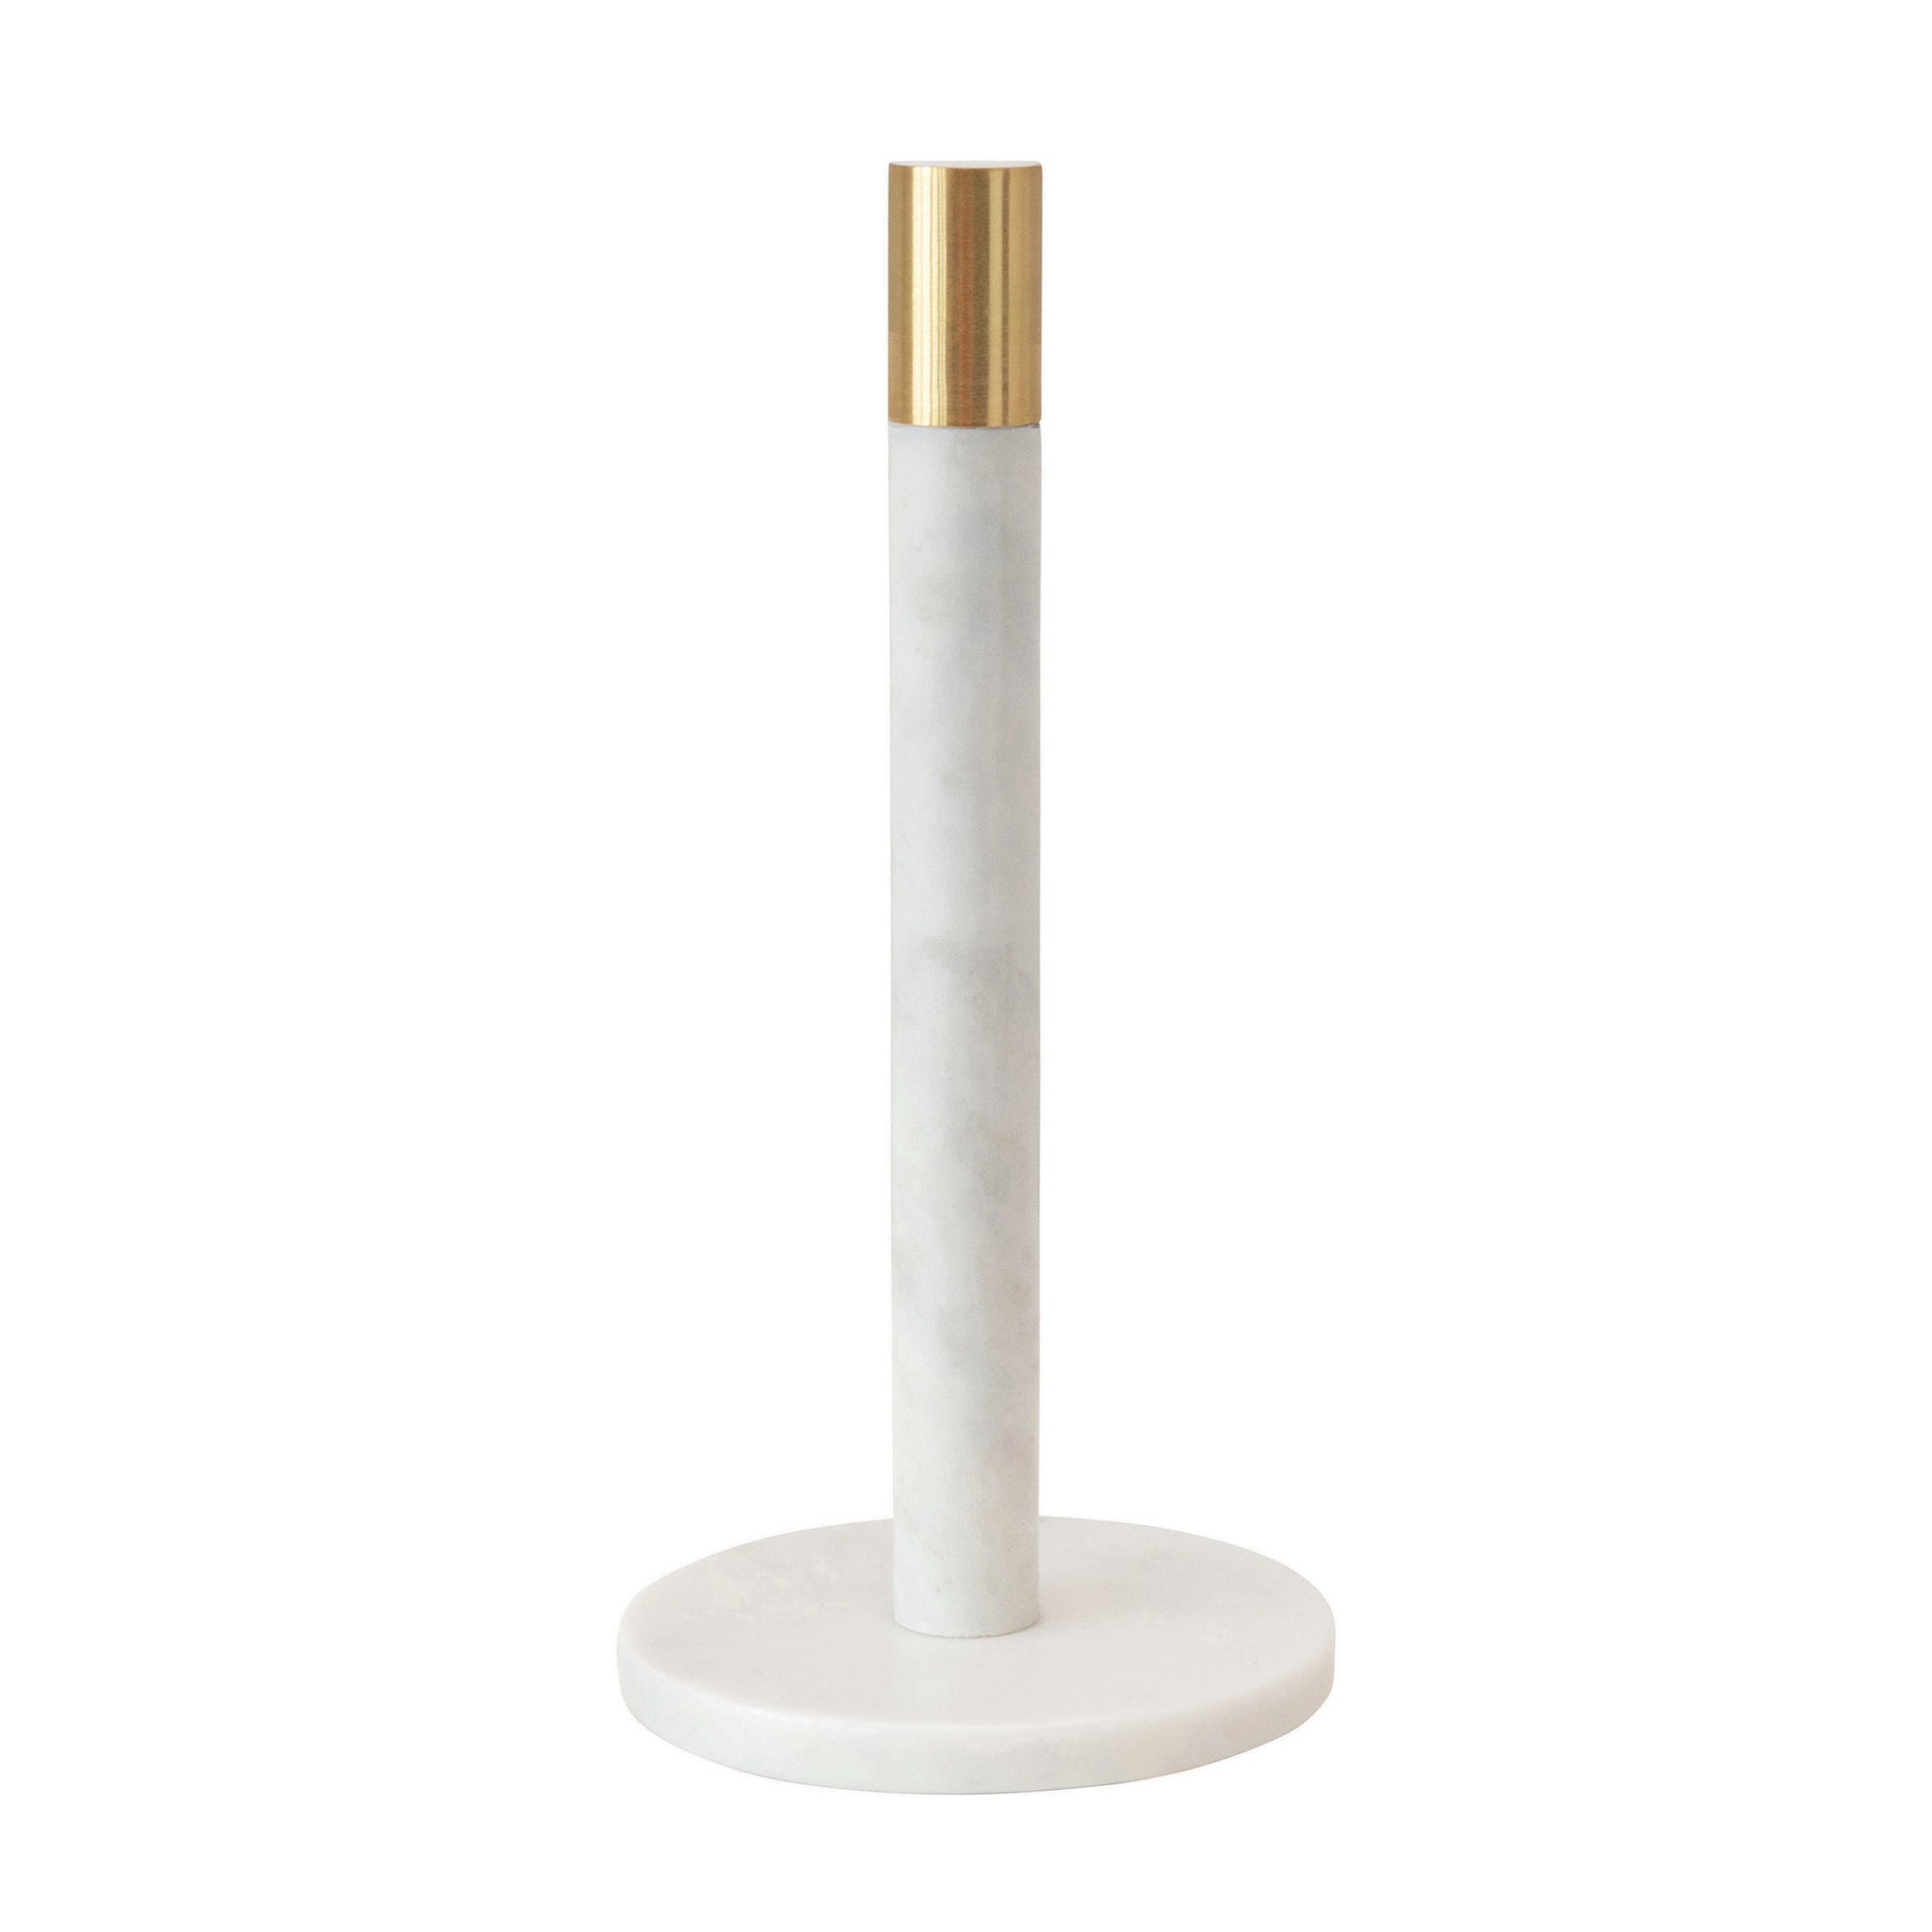 Marble Paper Towel Holder w/ Brass Top, White 12"H